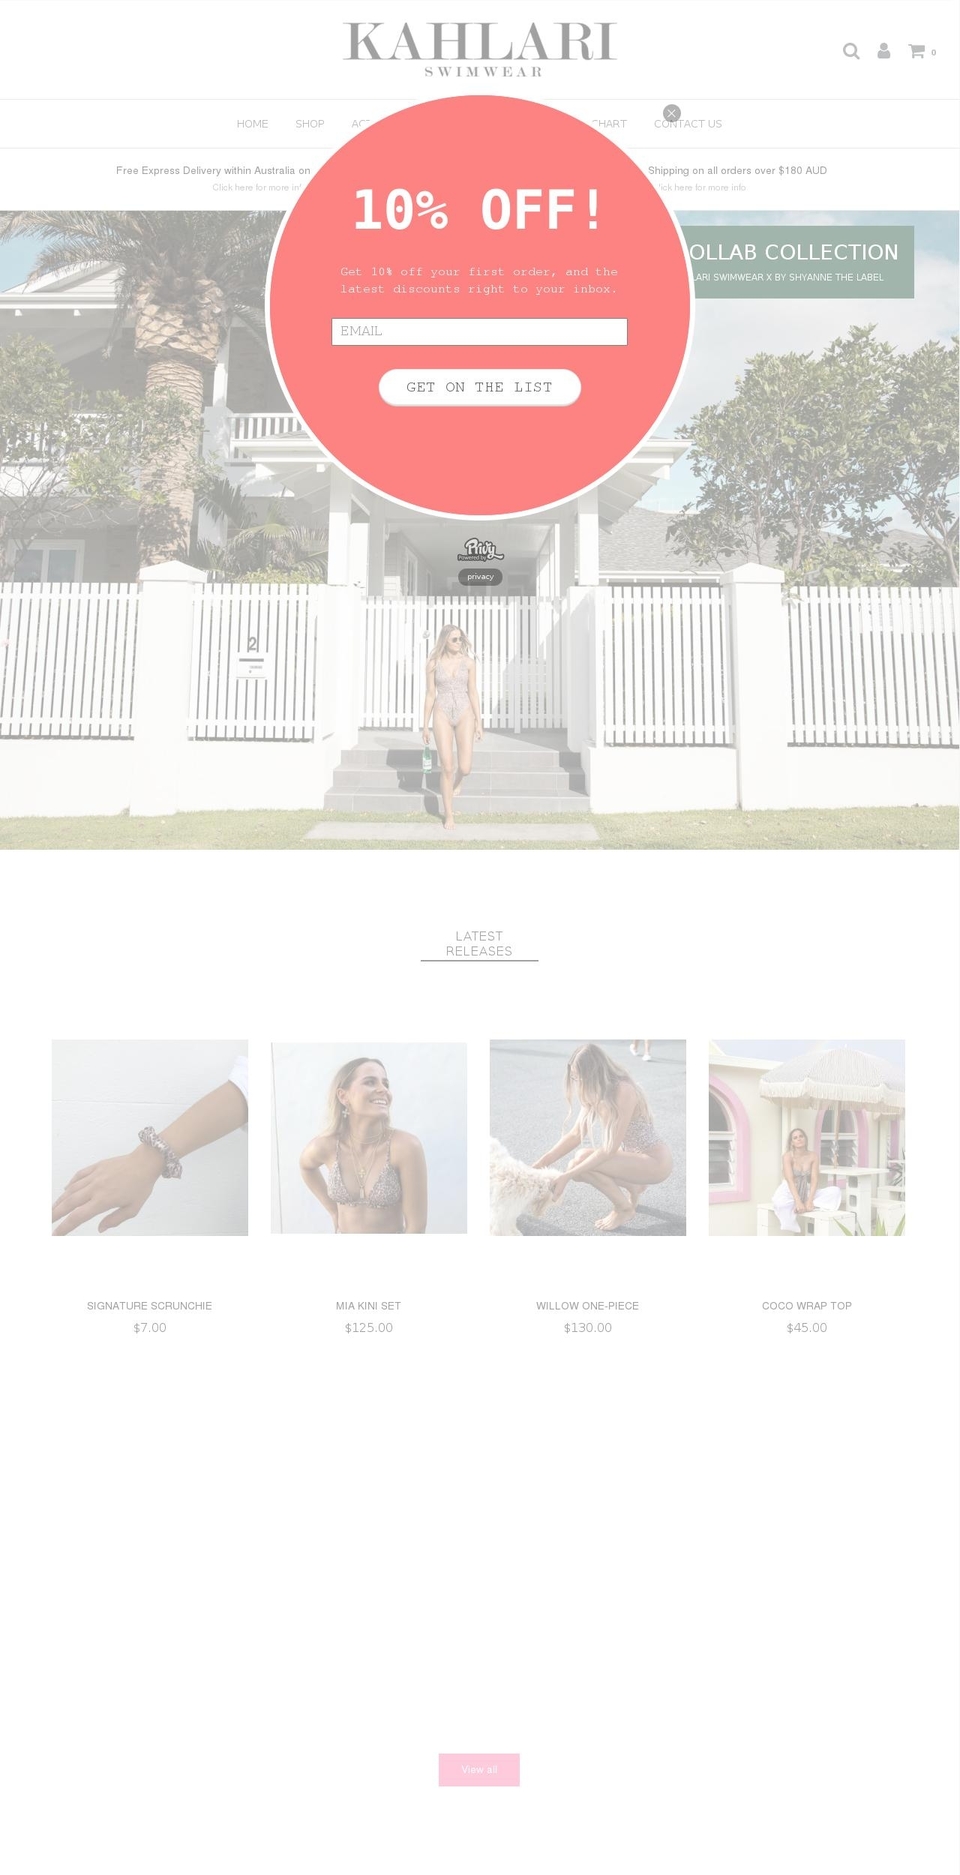 Copy of Envy Shopify theme site example kahlariswimwear.com